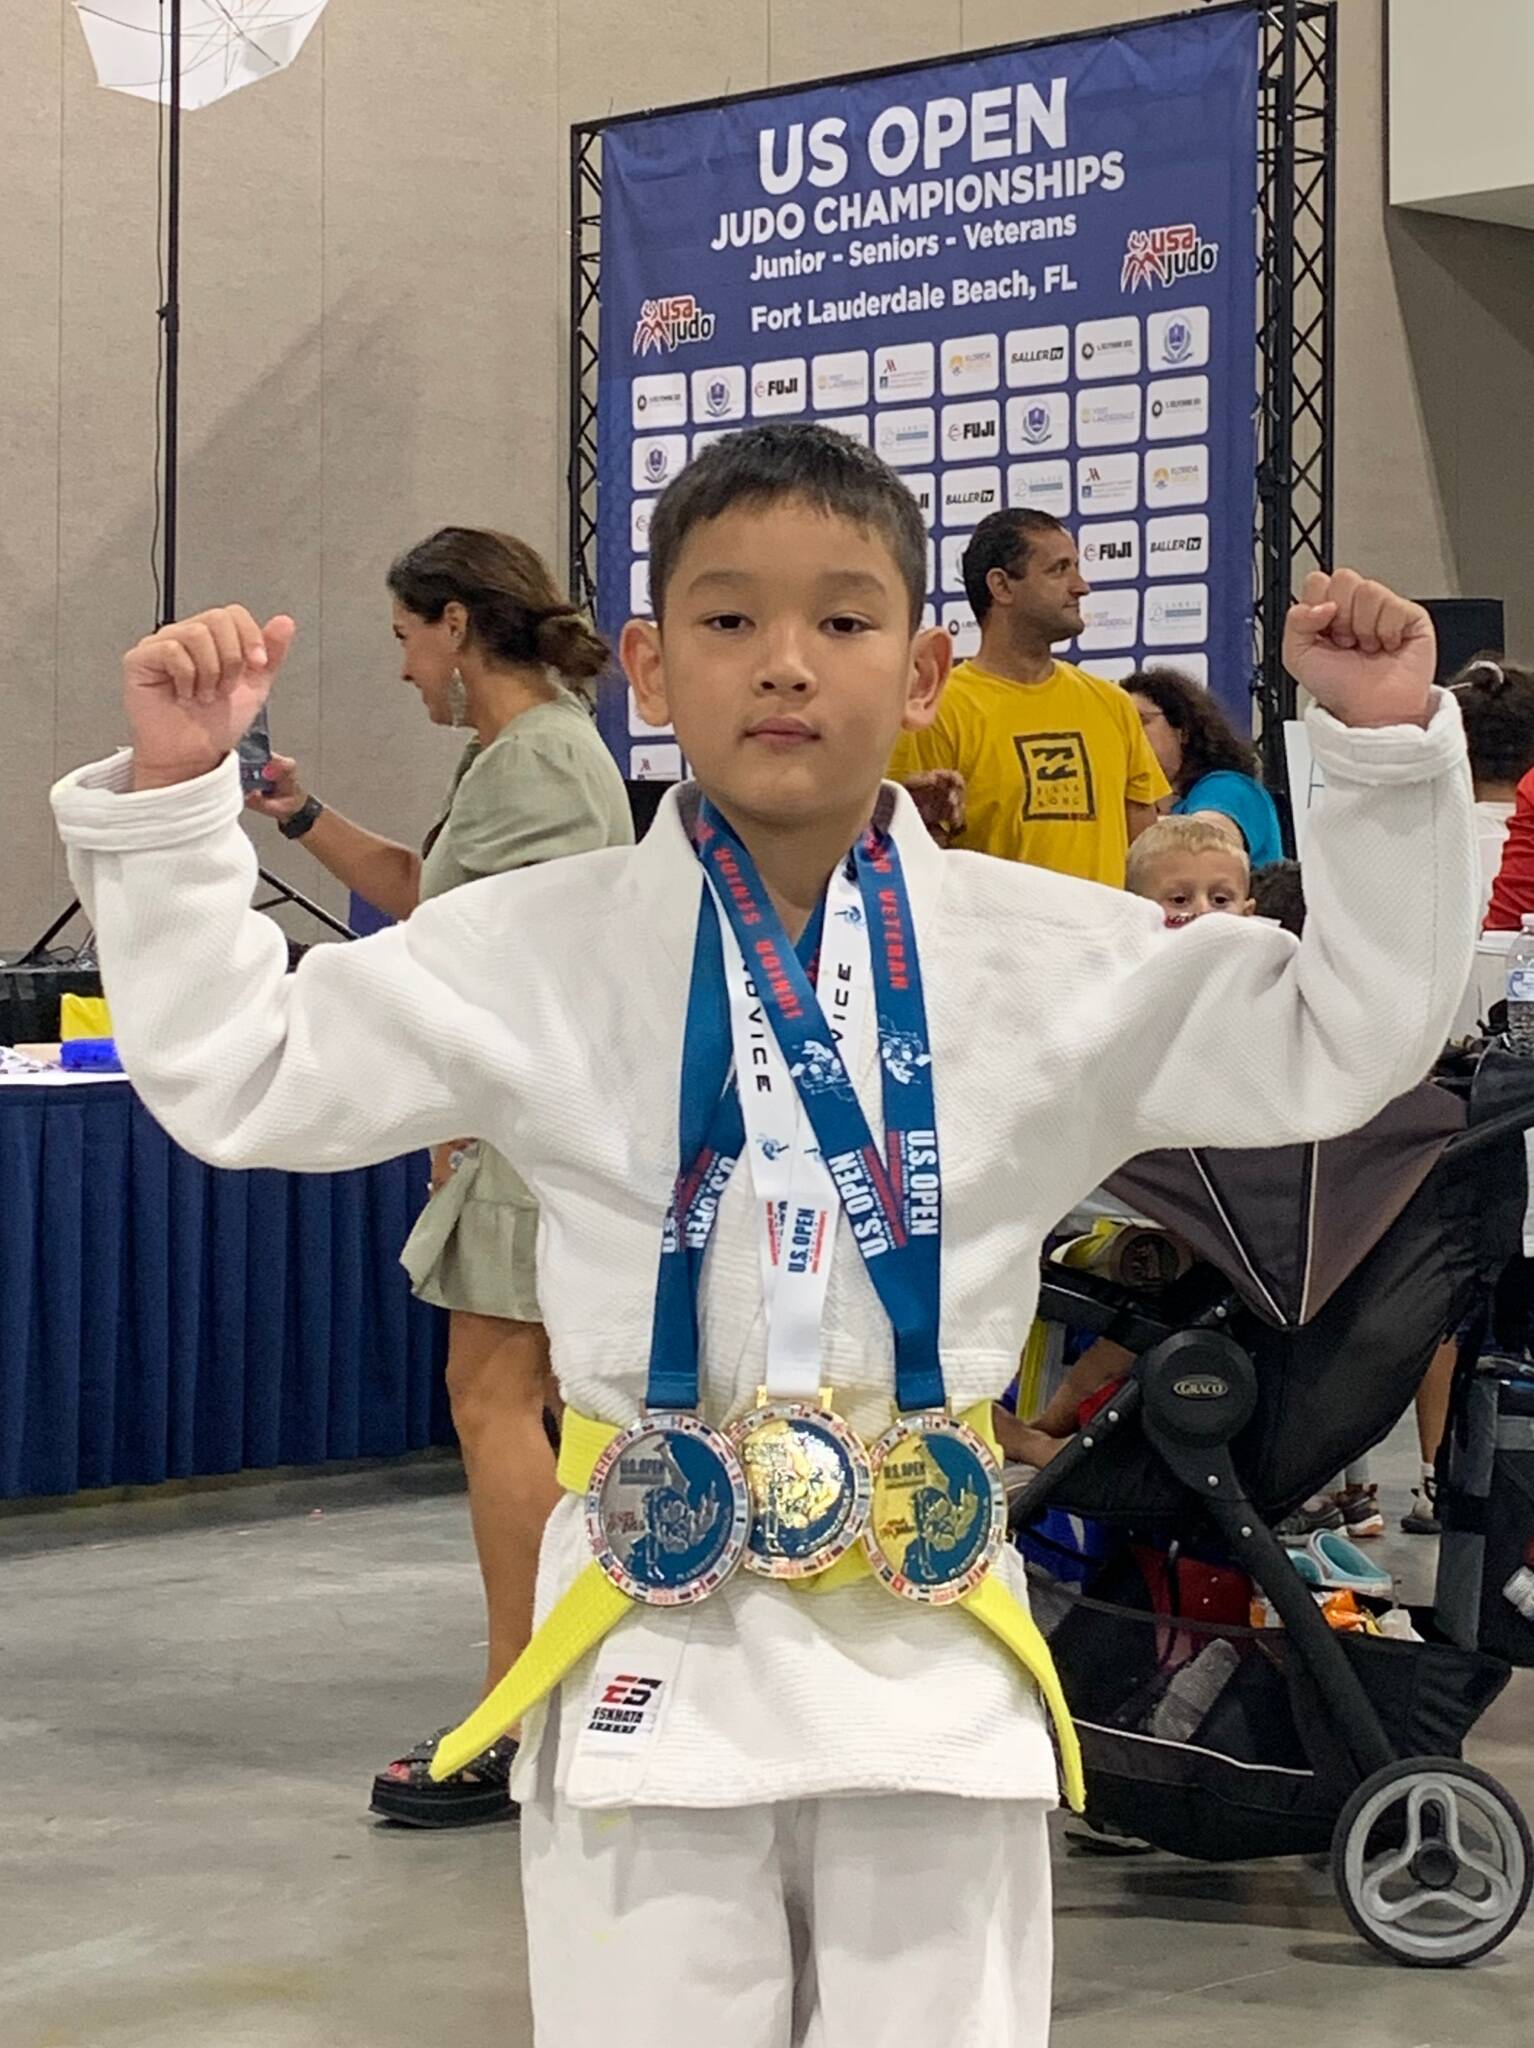 Northwood Elementary School student Mikhail Zulaev won two gold medals and a silver medal at the U.S. Open Judo Championships from July 28-31 in Fort Lauderdale Beach, Florida. He won in Novice Bantam 3 -29 kg born in 2015 and Bantam 3 -29kg born in 2015, and placed second in Bantam 4 born in 2014. Courtesy photo